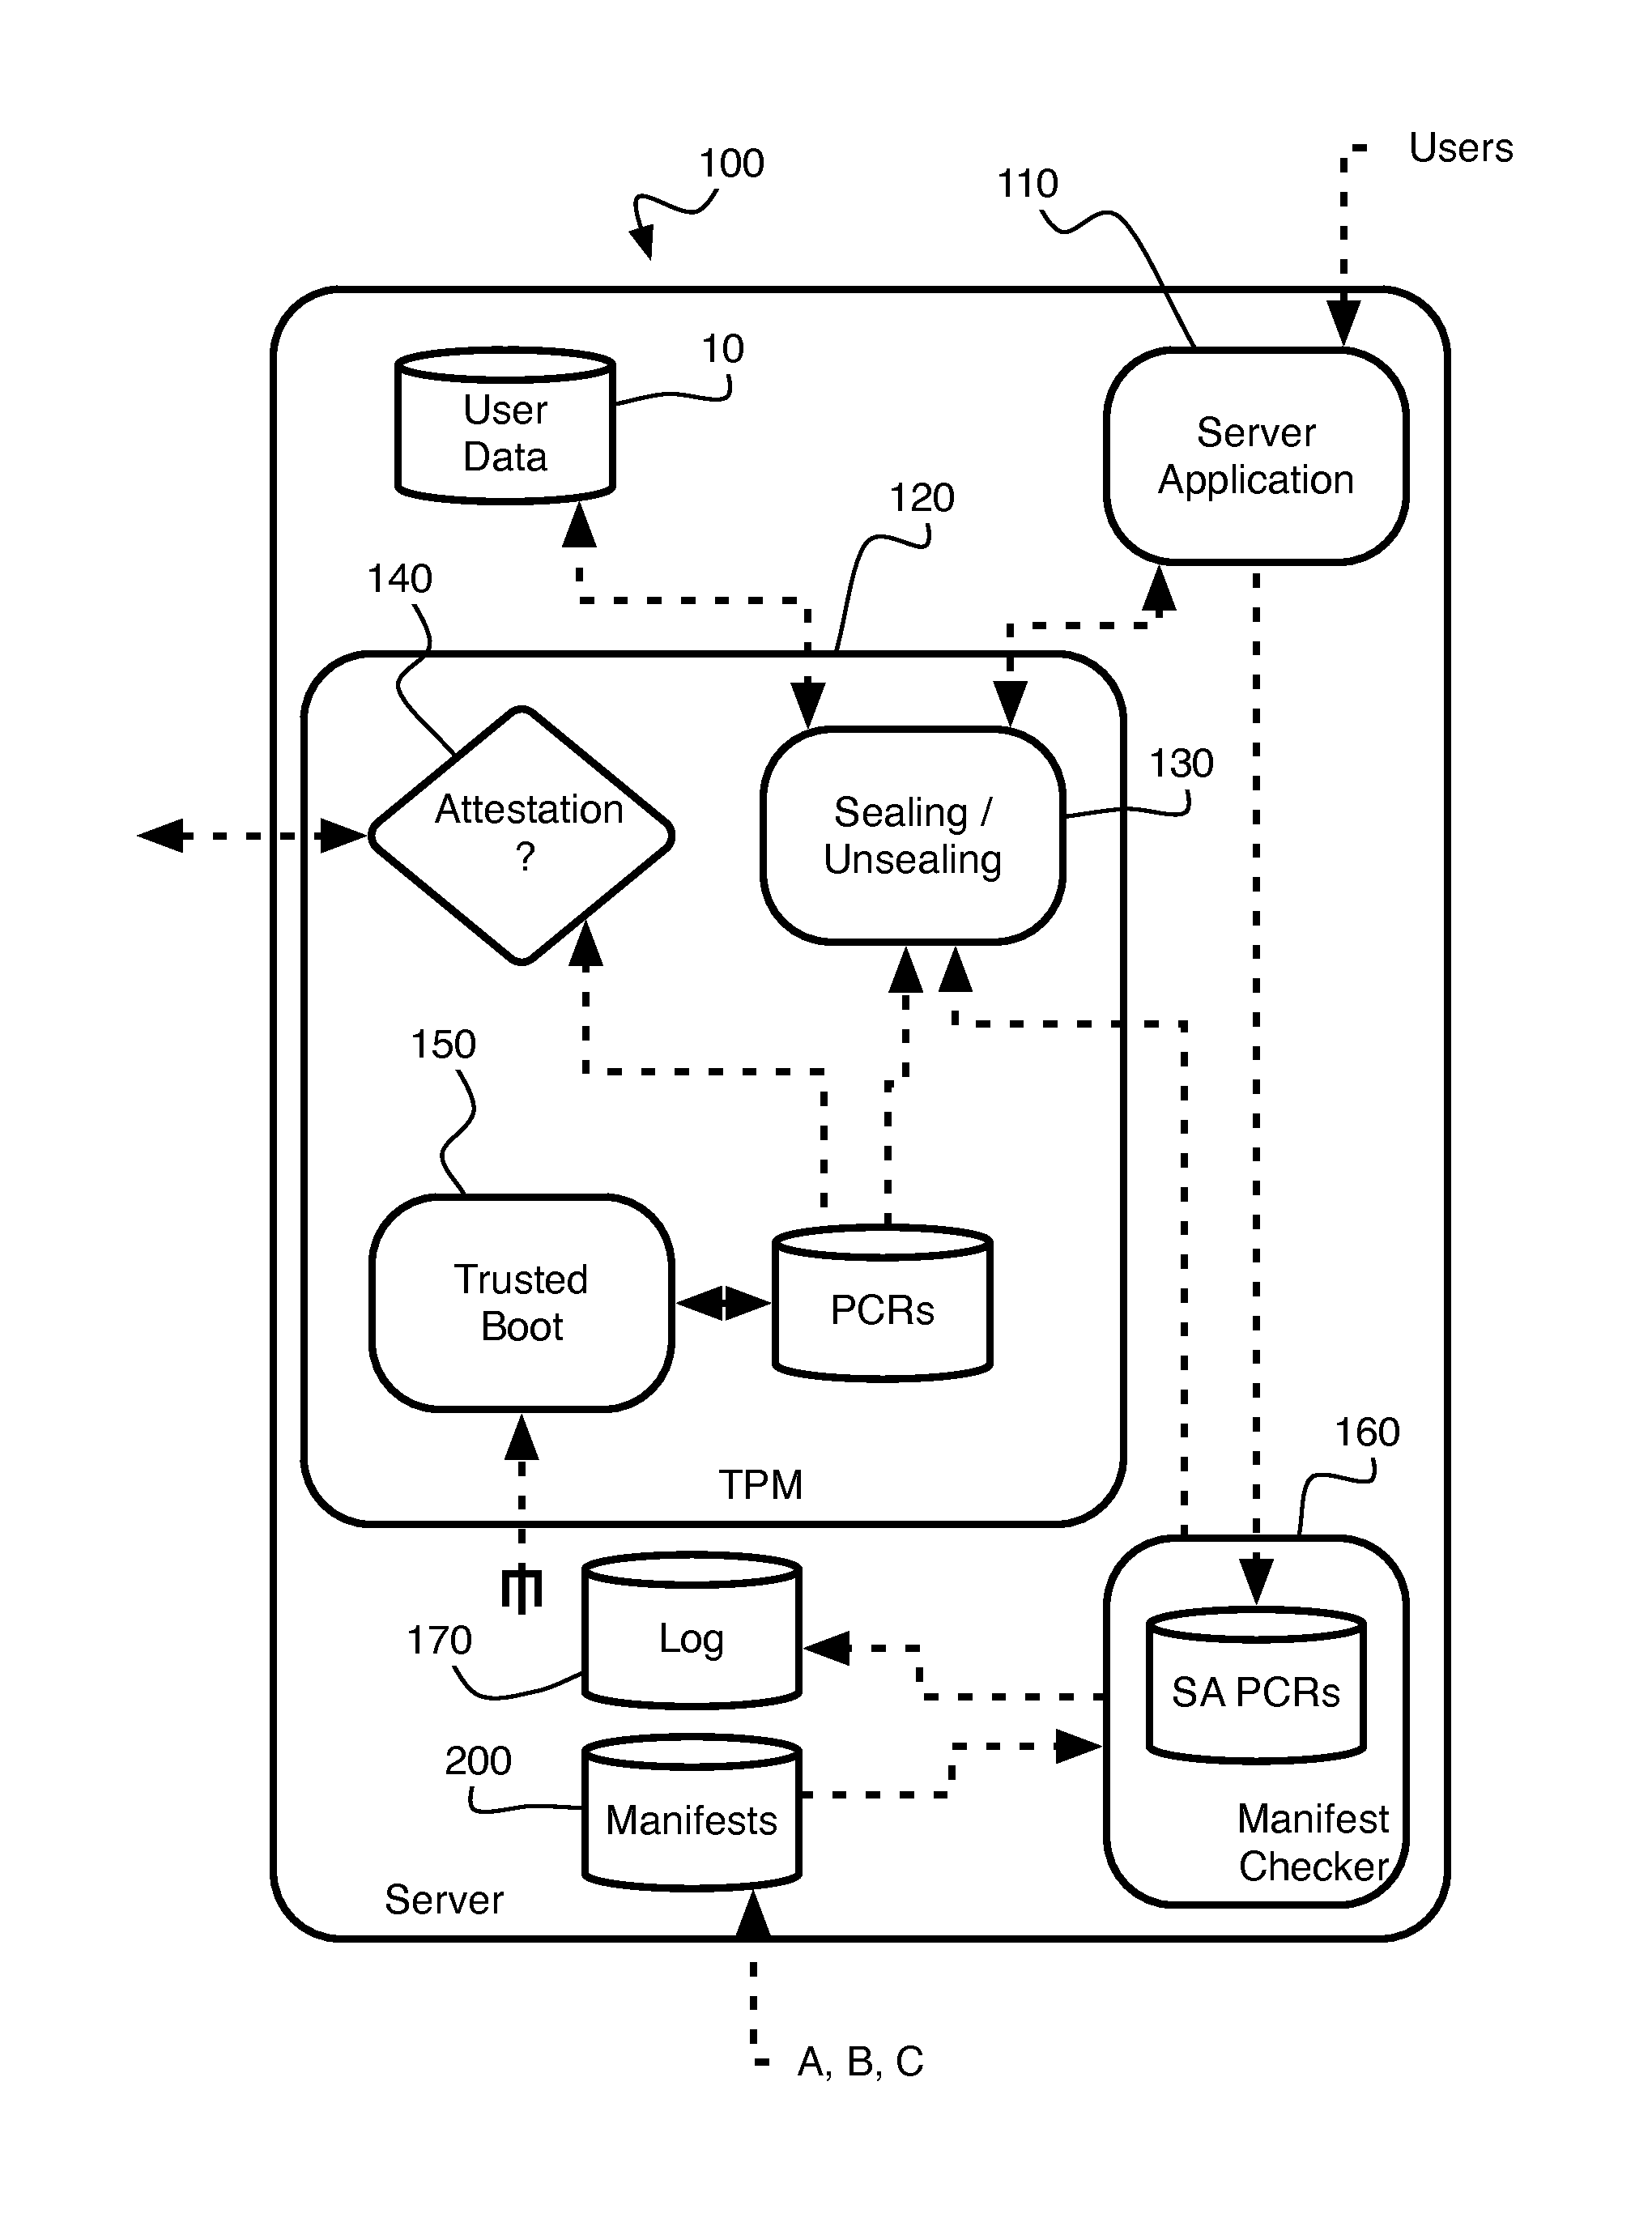 Systems and methods for enforcing third party oversight of data anonymization